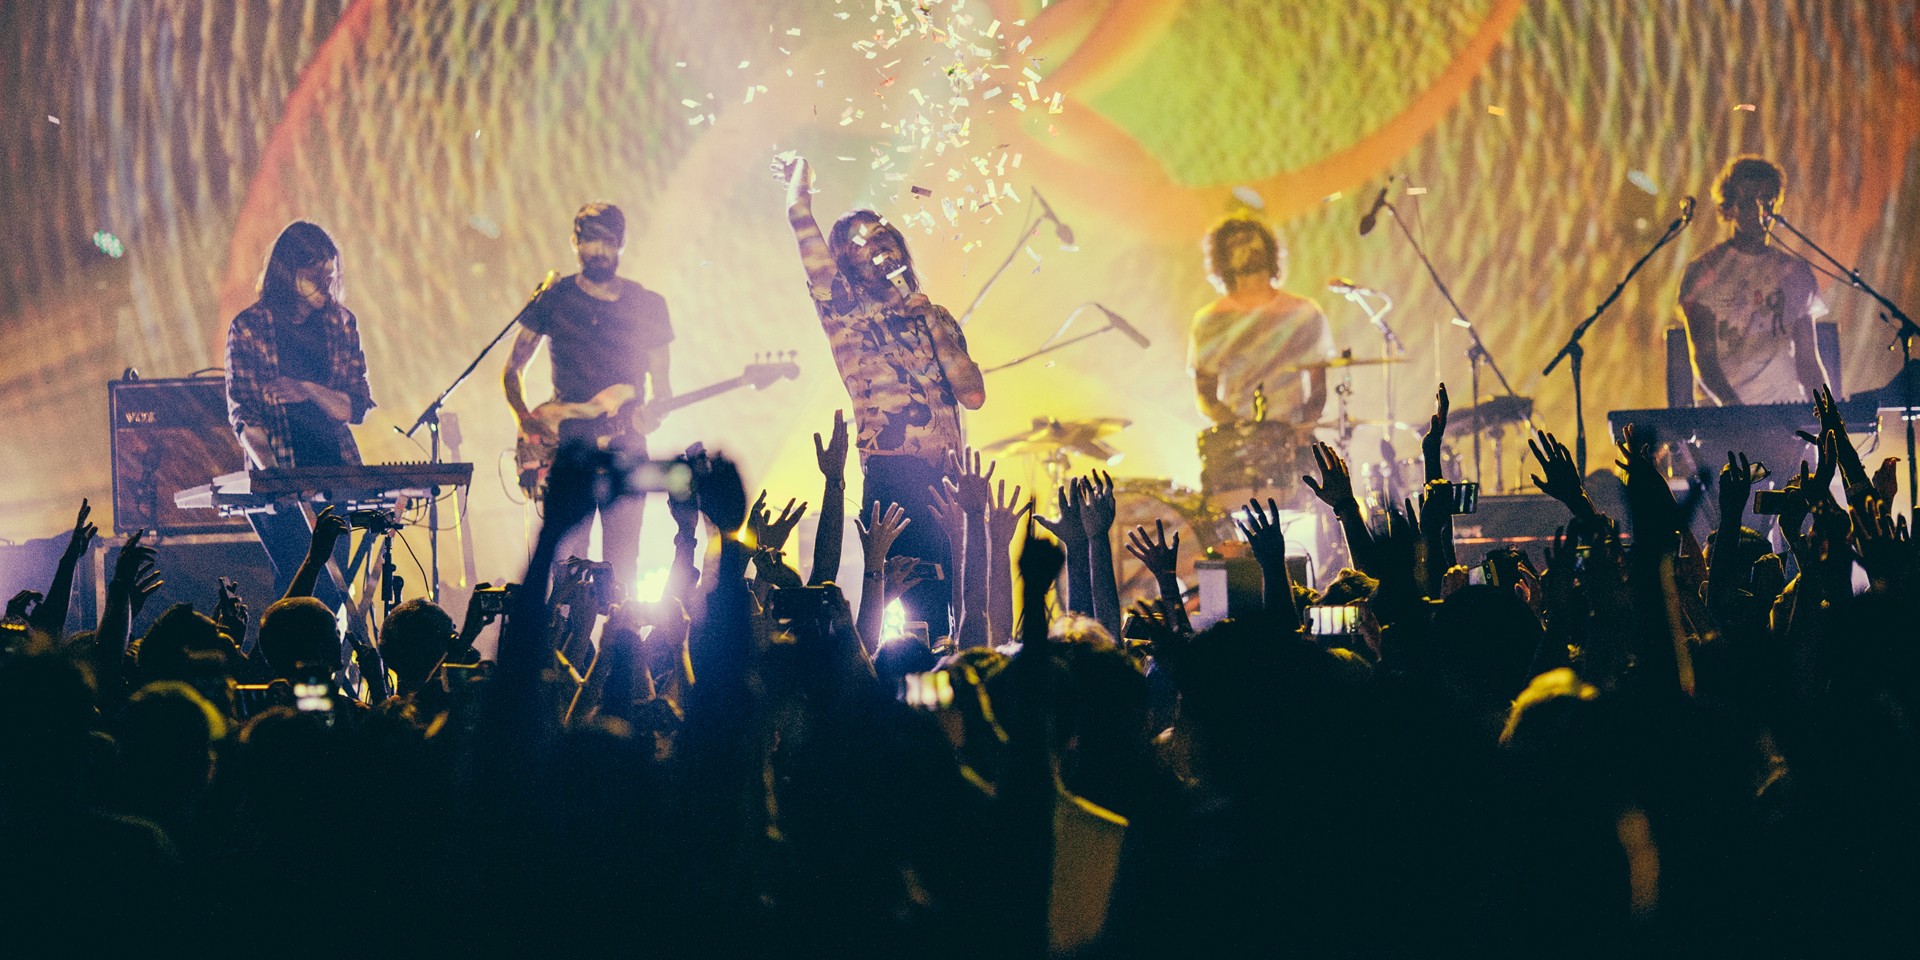 GIG REPORT: Tame Impala turns regal theatre into psychedelic dance floor